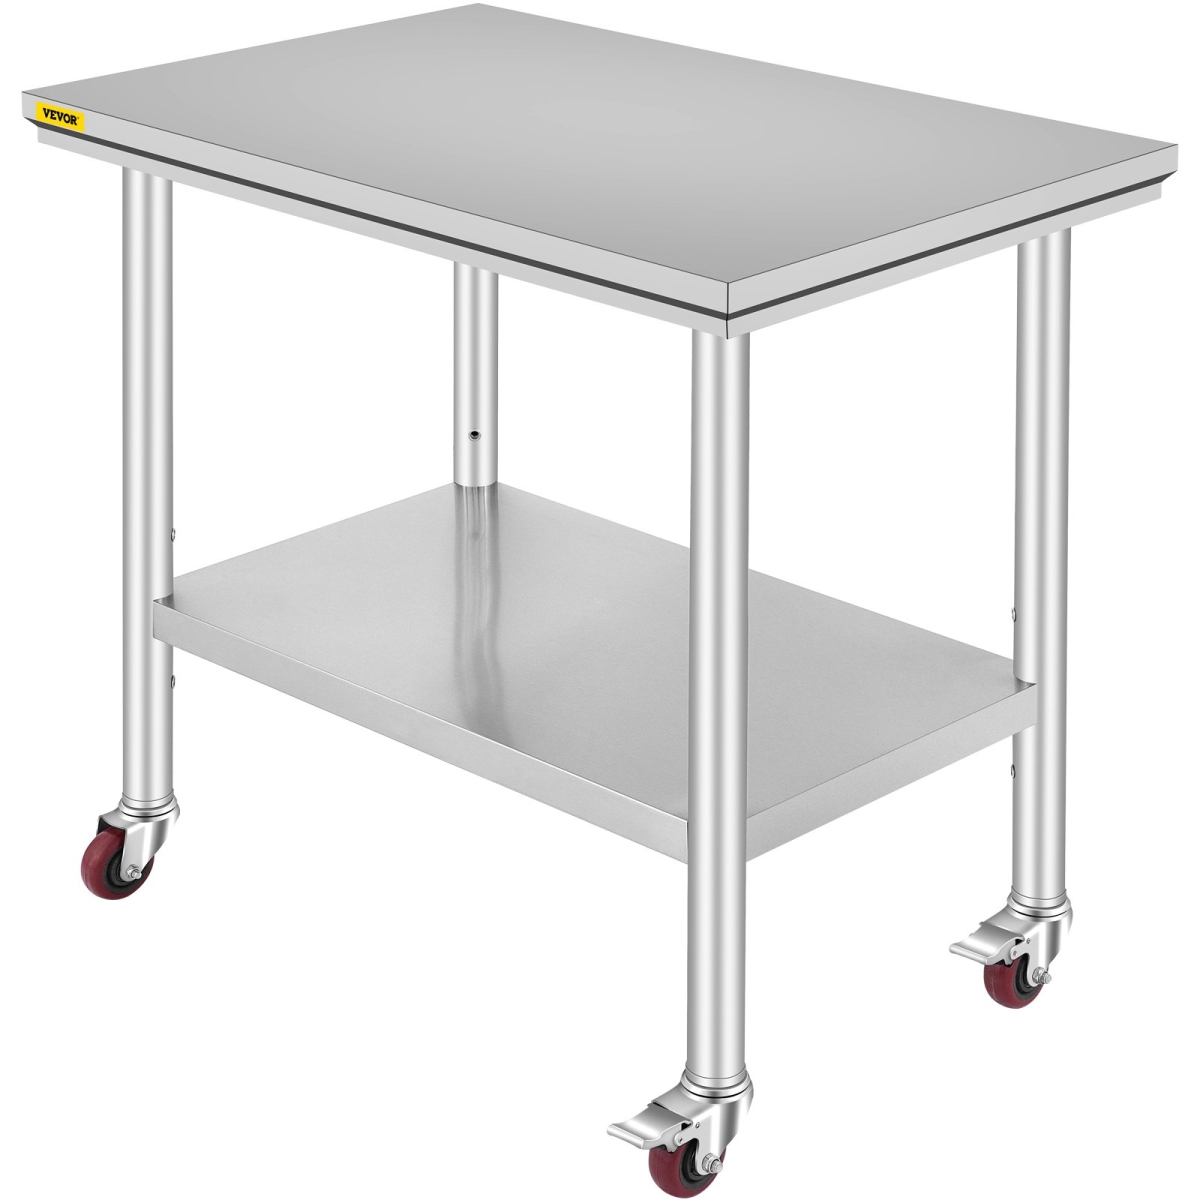 Picture of Vevor SYGZT36X24INDJL01V0 36 x 24 in. Stainless Steel Food Prep Work Table with 4 Wheels